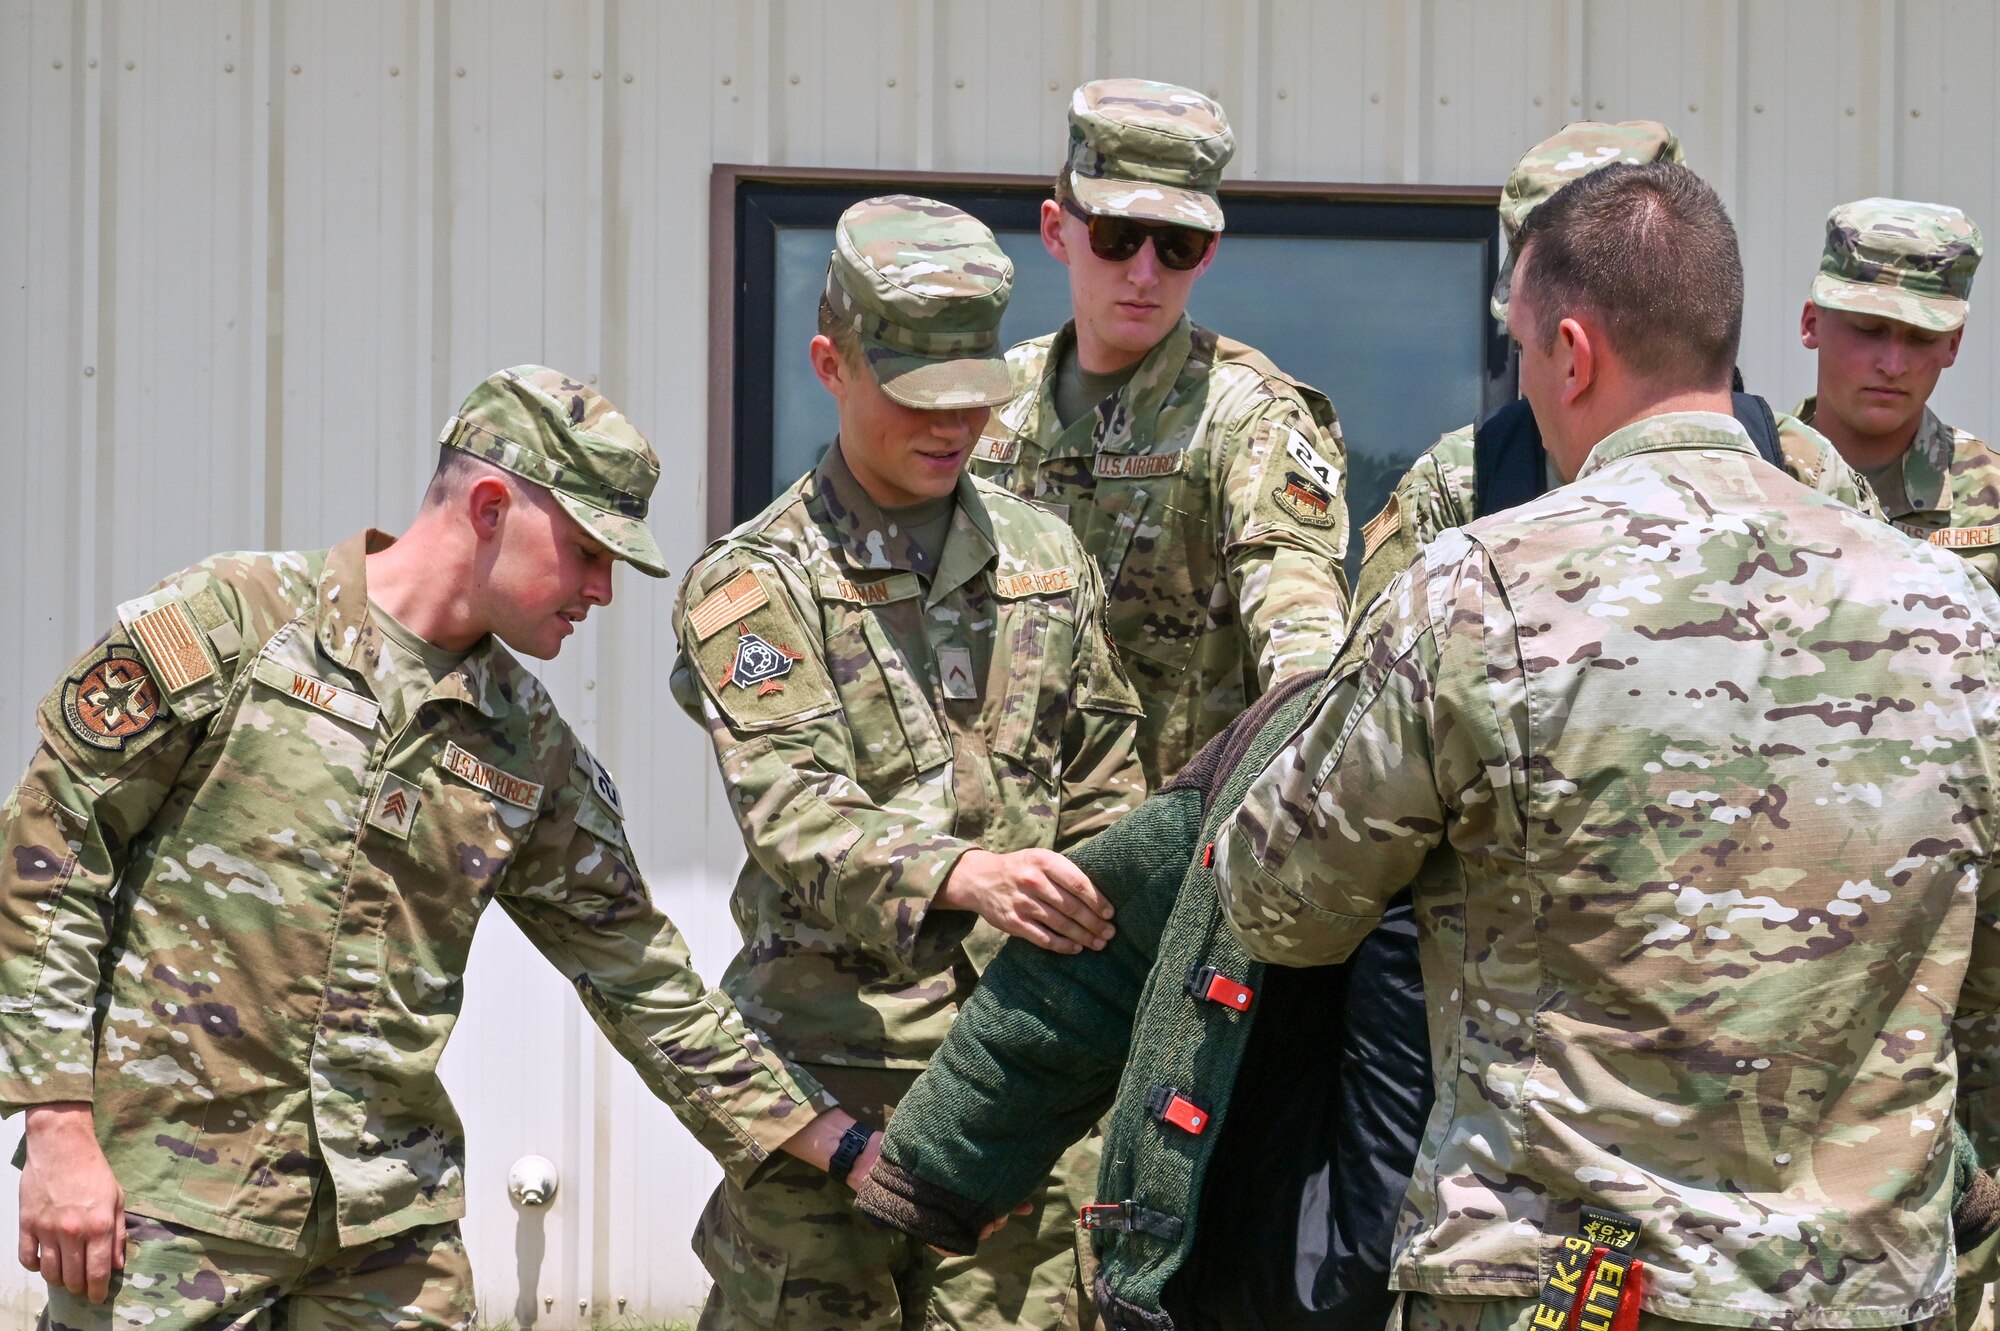 Technical Sergeant Jonathan Kuehne, 22nd Security Forces kennel master shows a group of United States Air Force Academy cadets a bite suit after a demonstration July 21, 2022, at McConnell Air Force Base, Kansas.